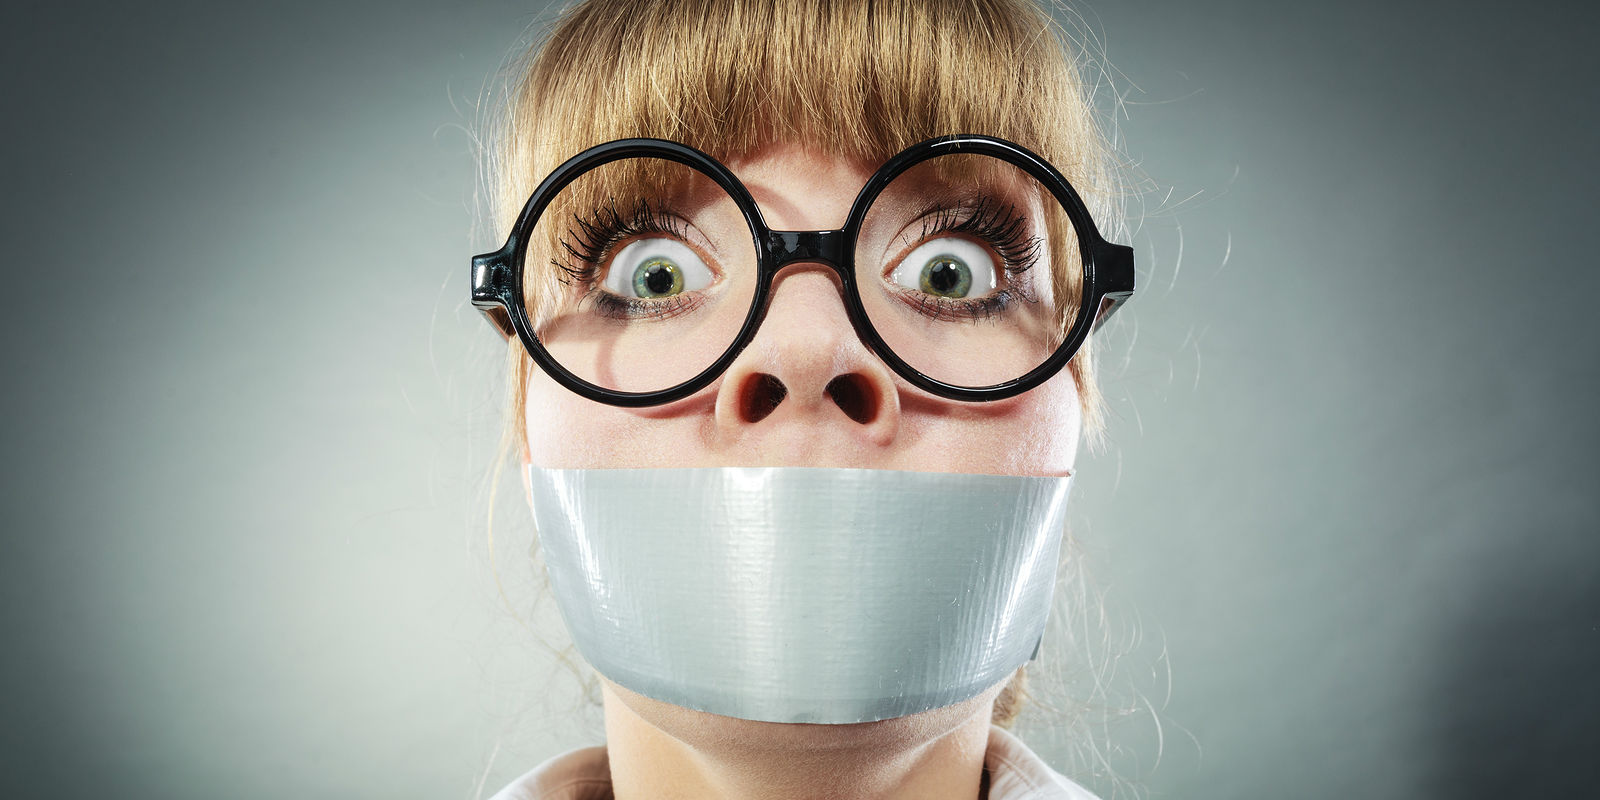 bigstock-Scared-Woman-With-Mouth-Taped-163464032.jpg (1600×800)